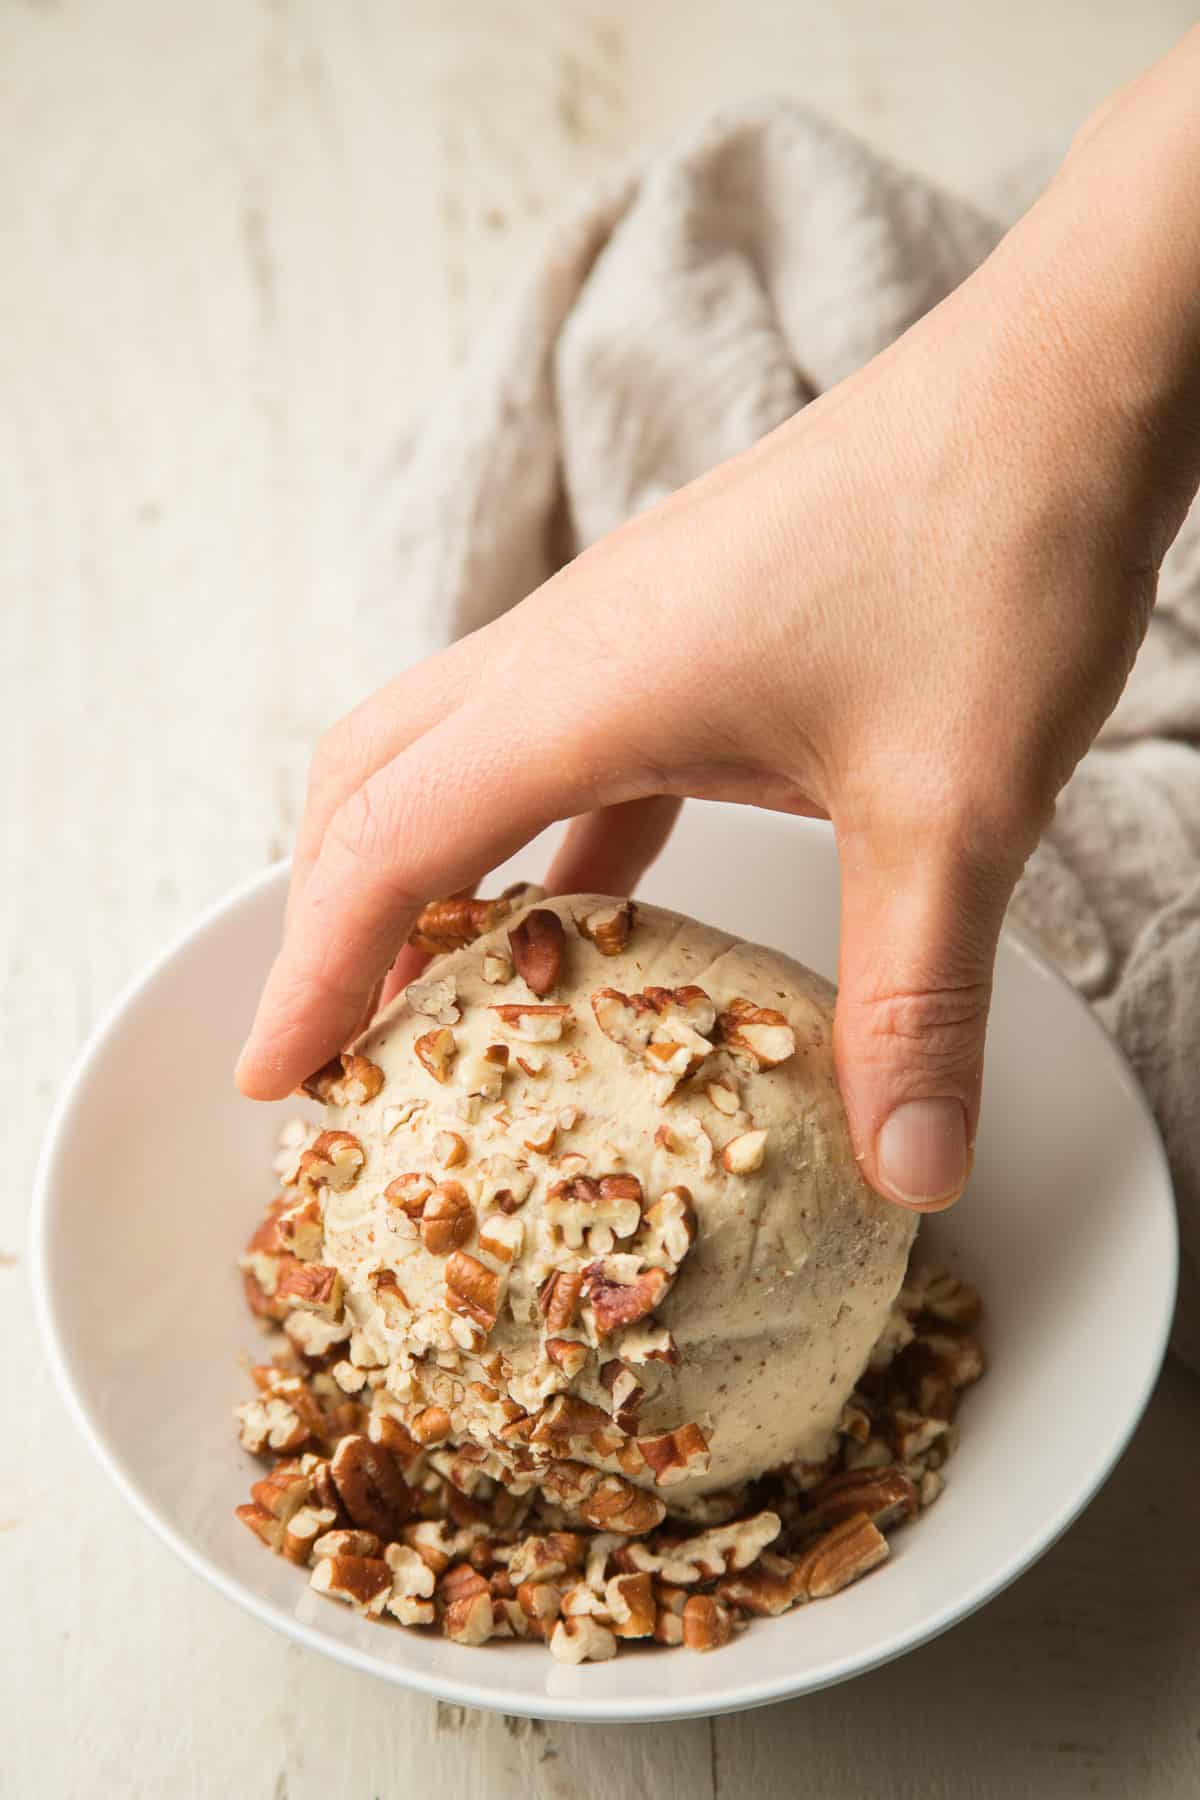 Hand Rolling a Vegan Cheese Ball in Pecans.